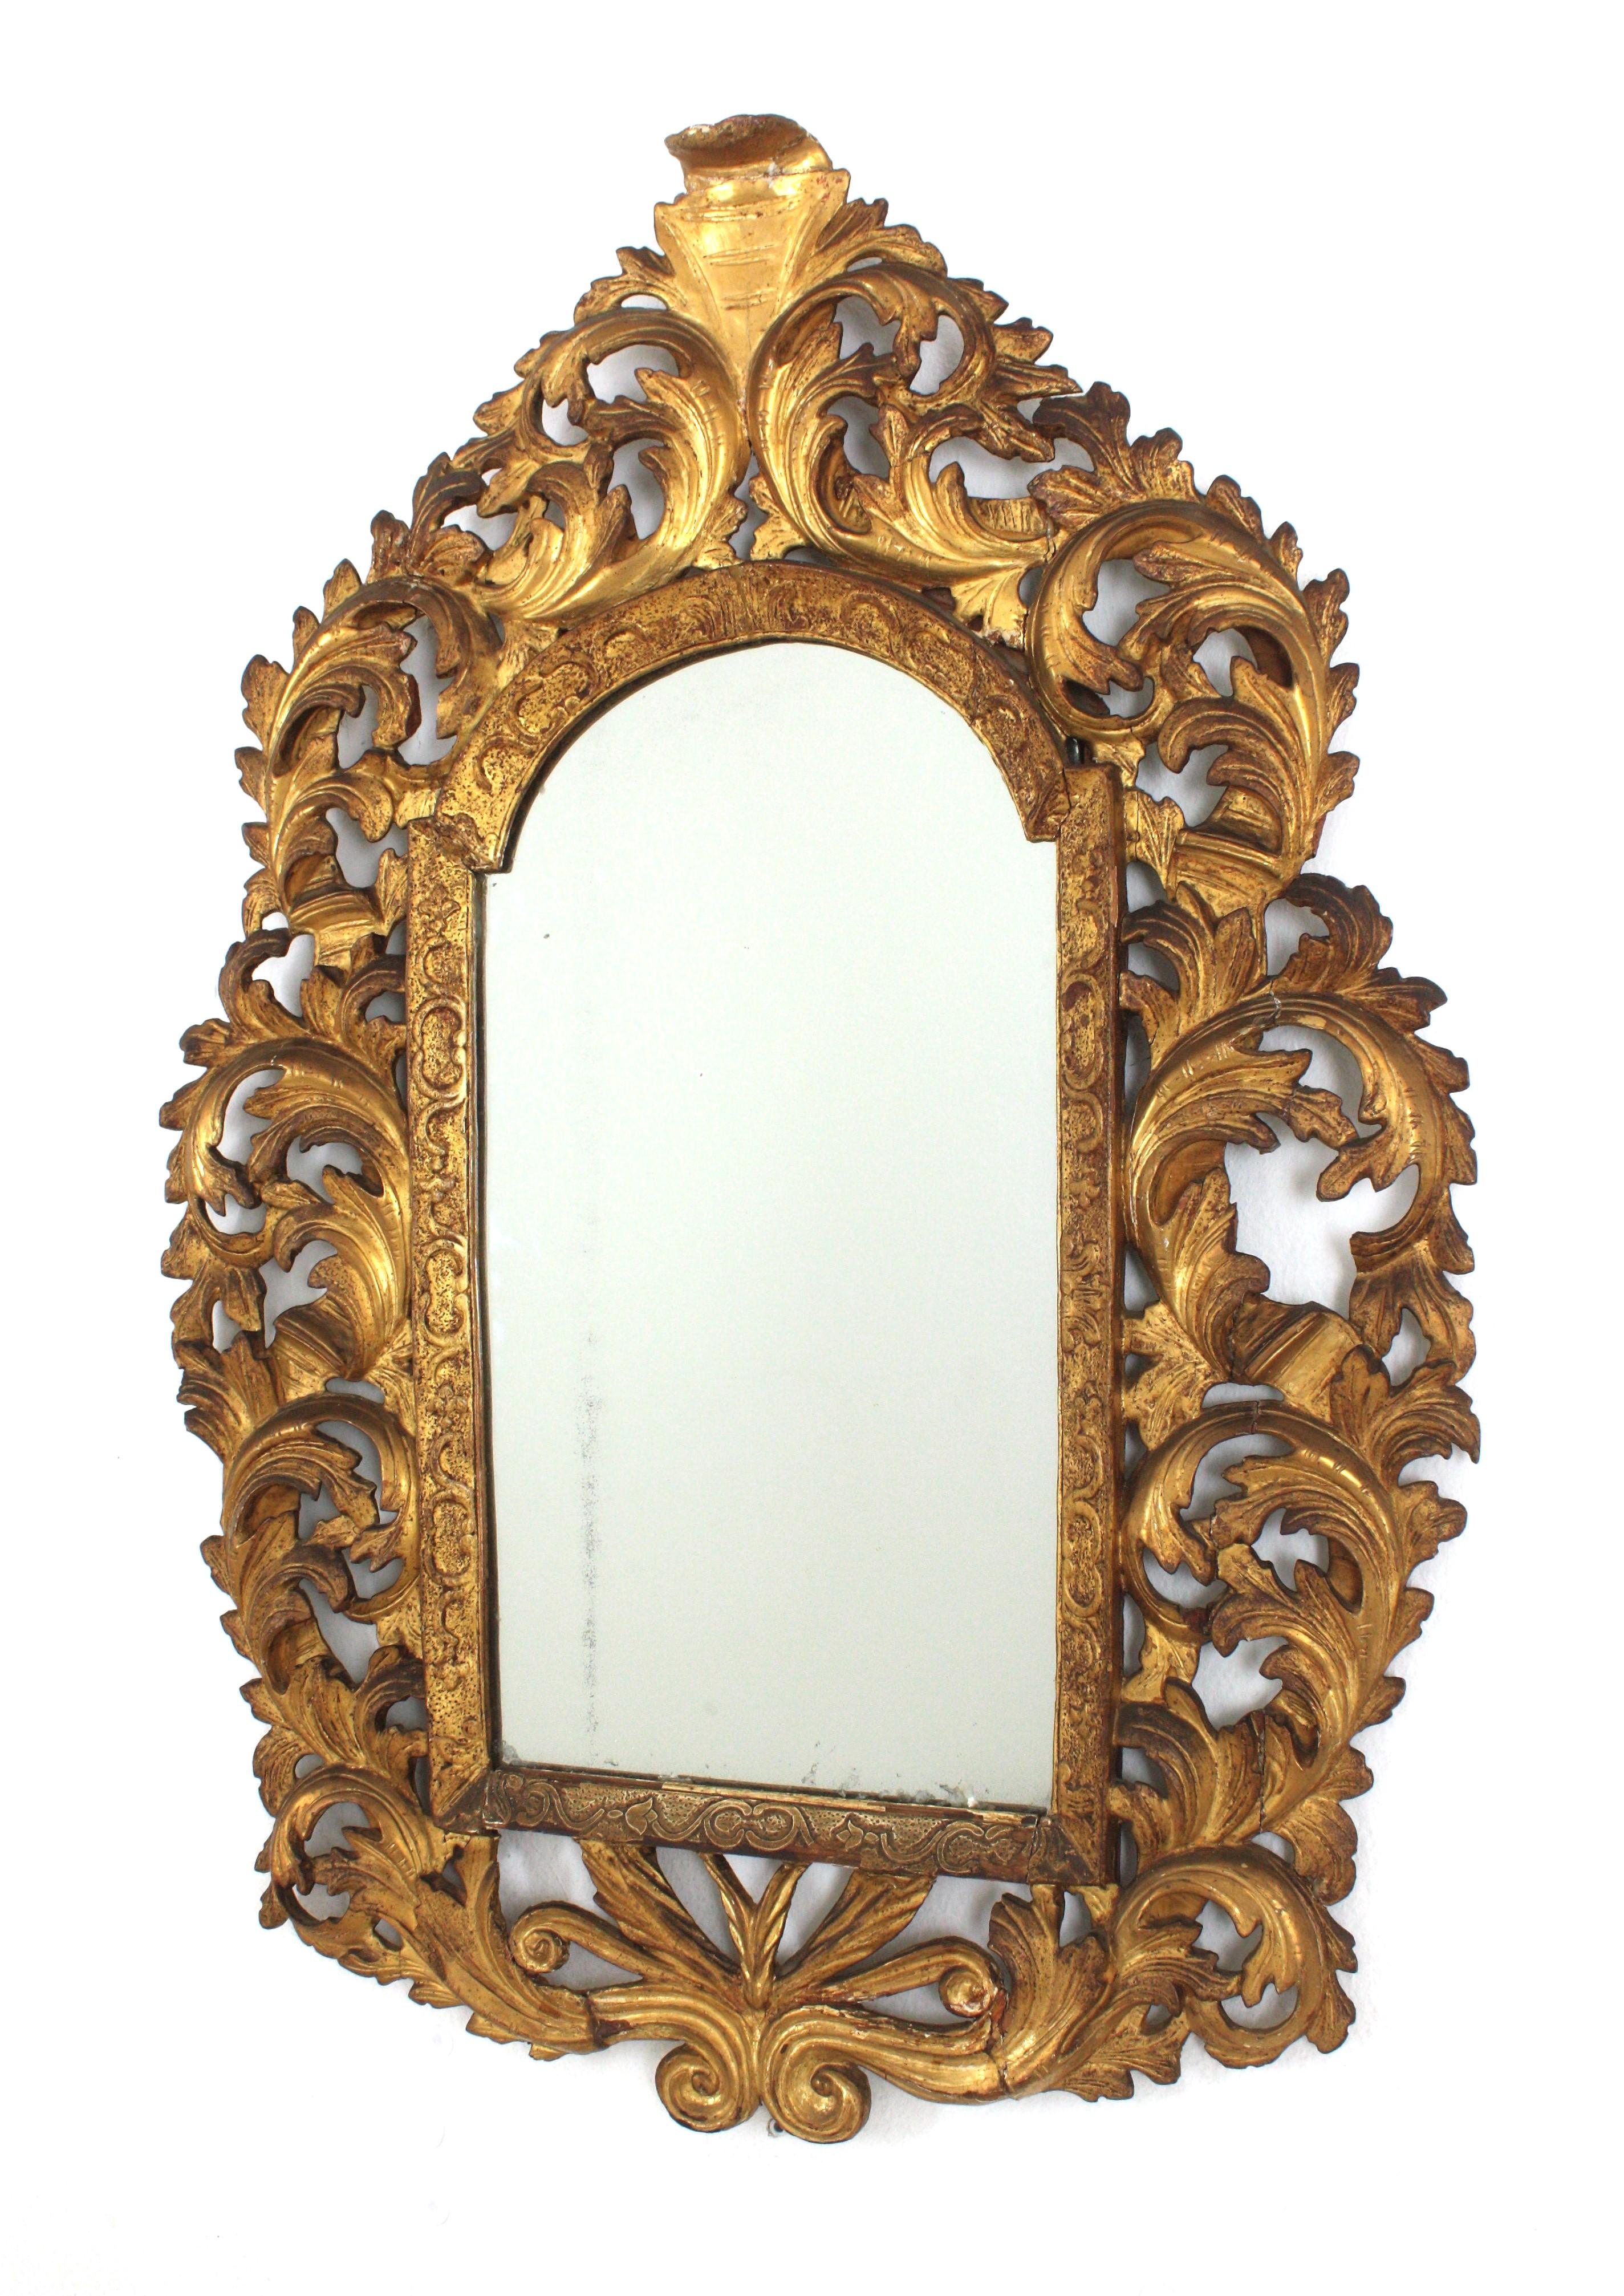 Florentine Giltwood Mirror with Foliage Frame and Arched Top For Sale 3